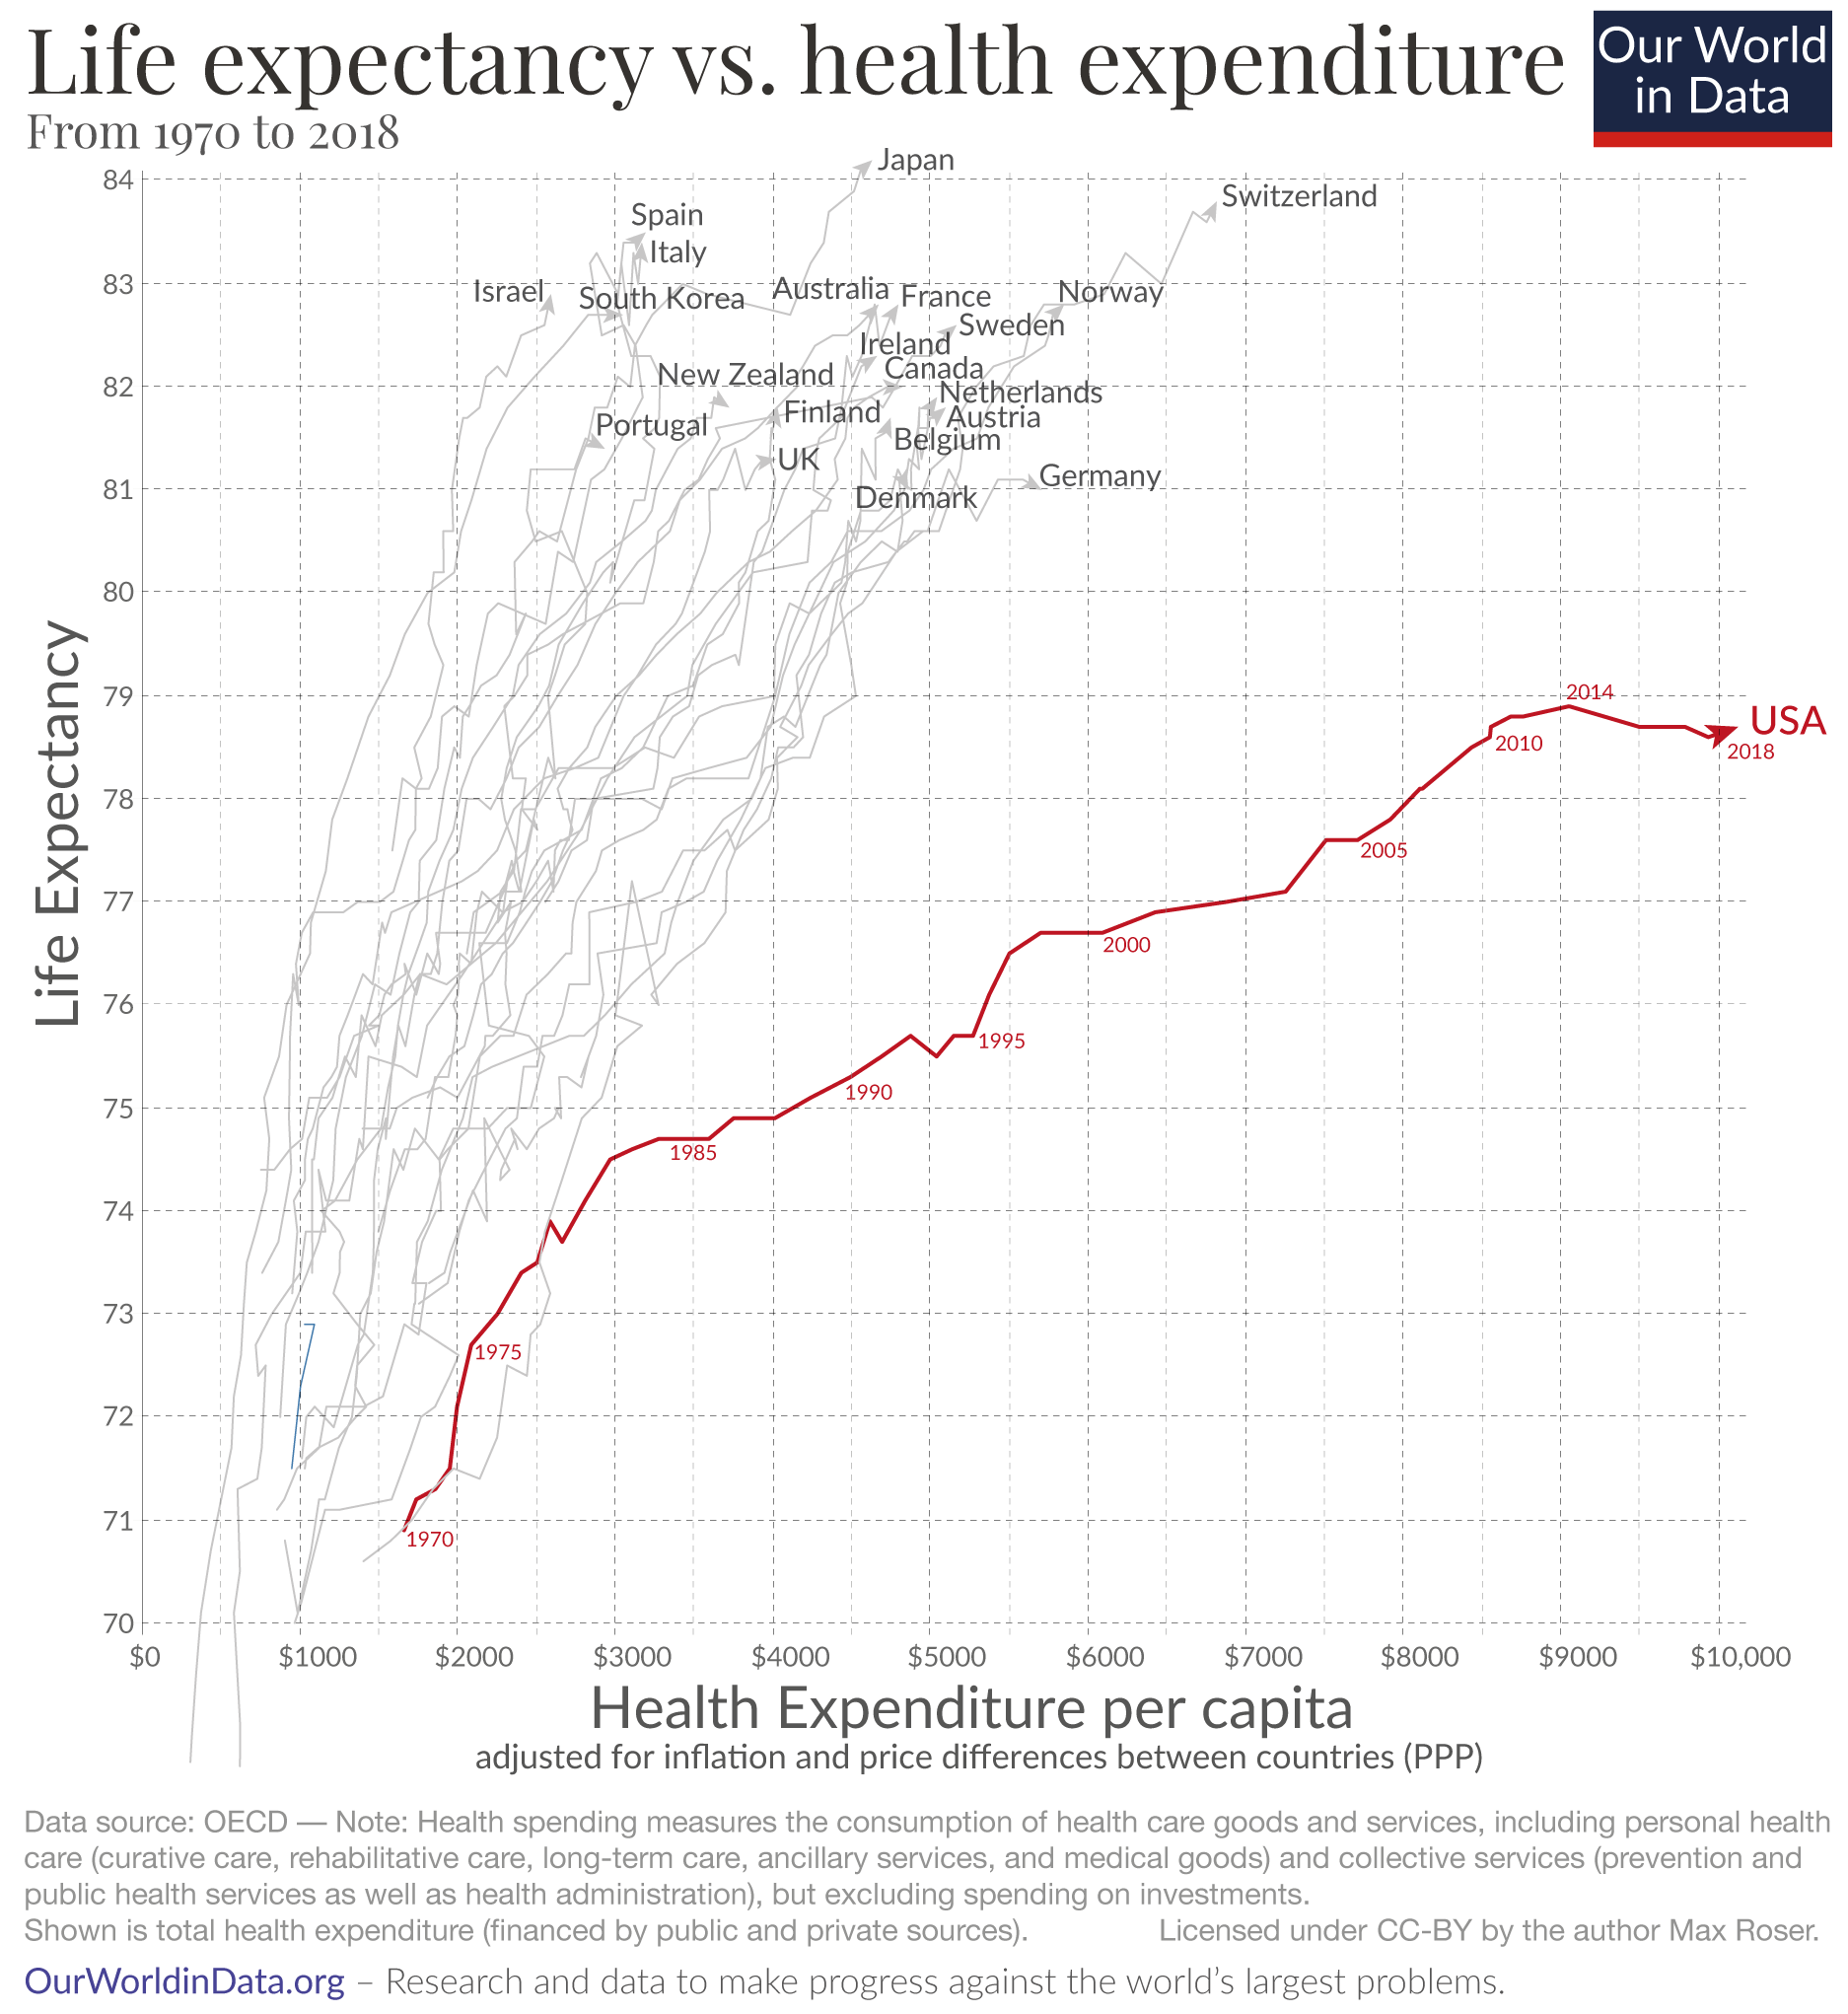 Featured image for the article on why life expectancy in the US is lower than in other rich countries. Scatter plot of life expectancy and health expenditure per capita, with each country between 1970 and 2018 represented as a line, the USA in red and other OECD countries in grey. 